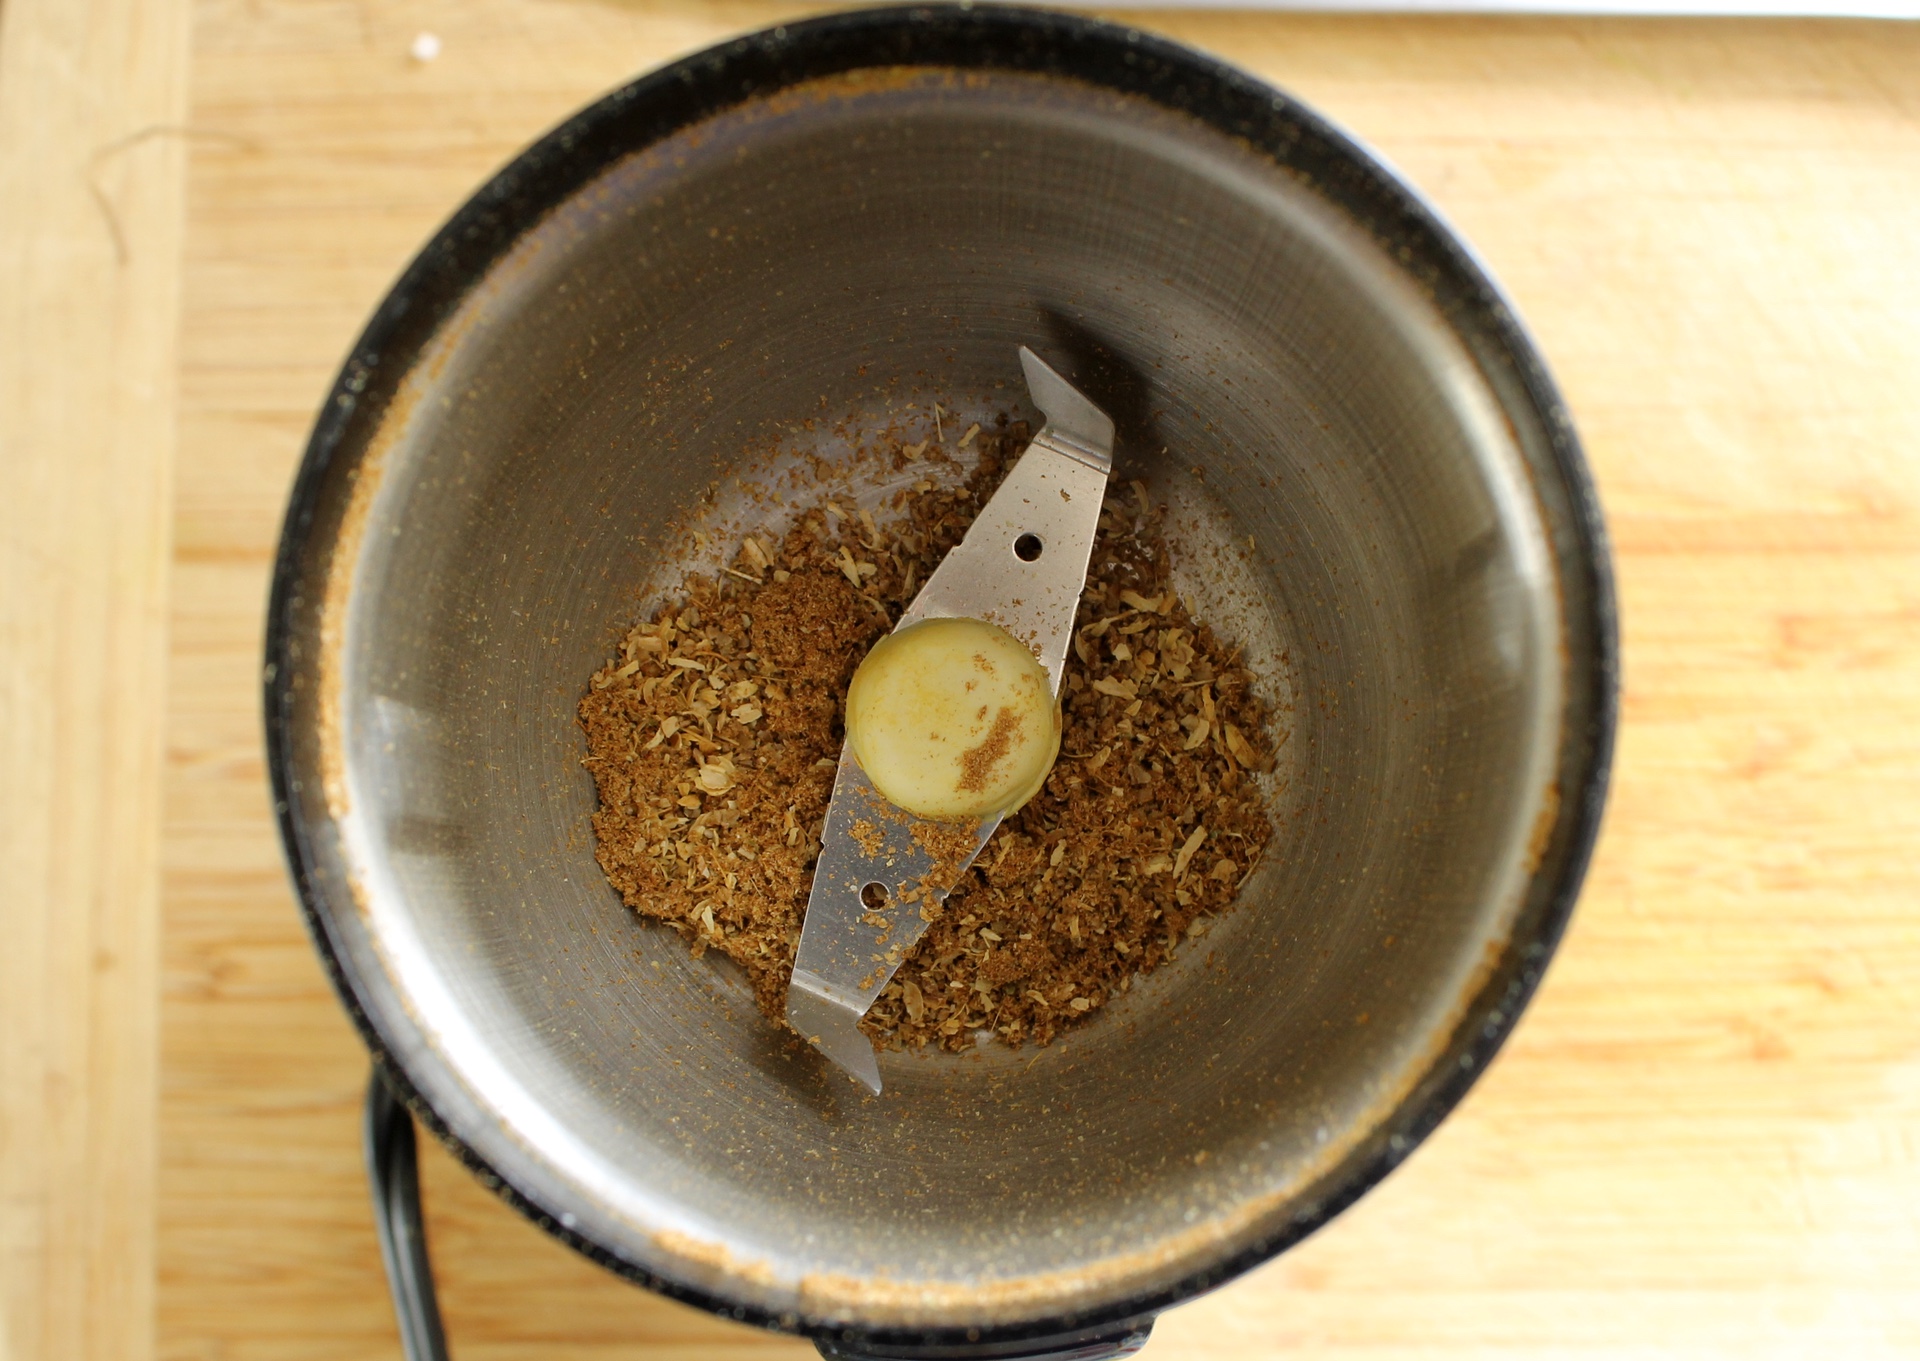 For the best flavor, start with whole spices, toast them on the stove, and grind them to a powder.